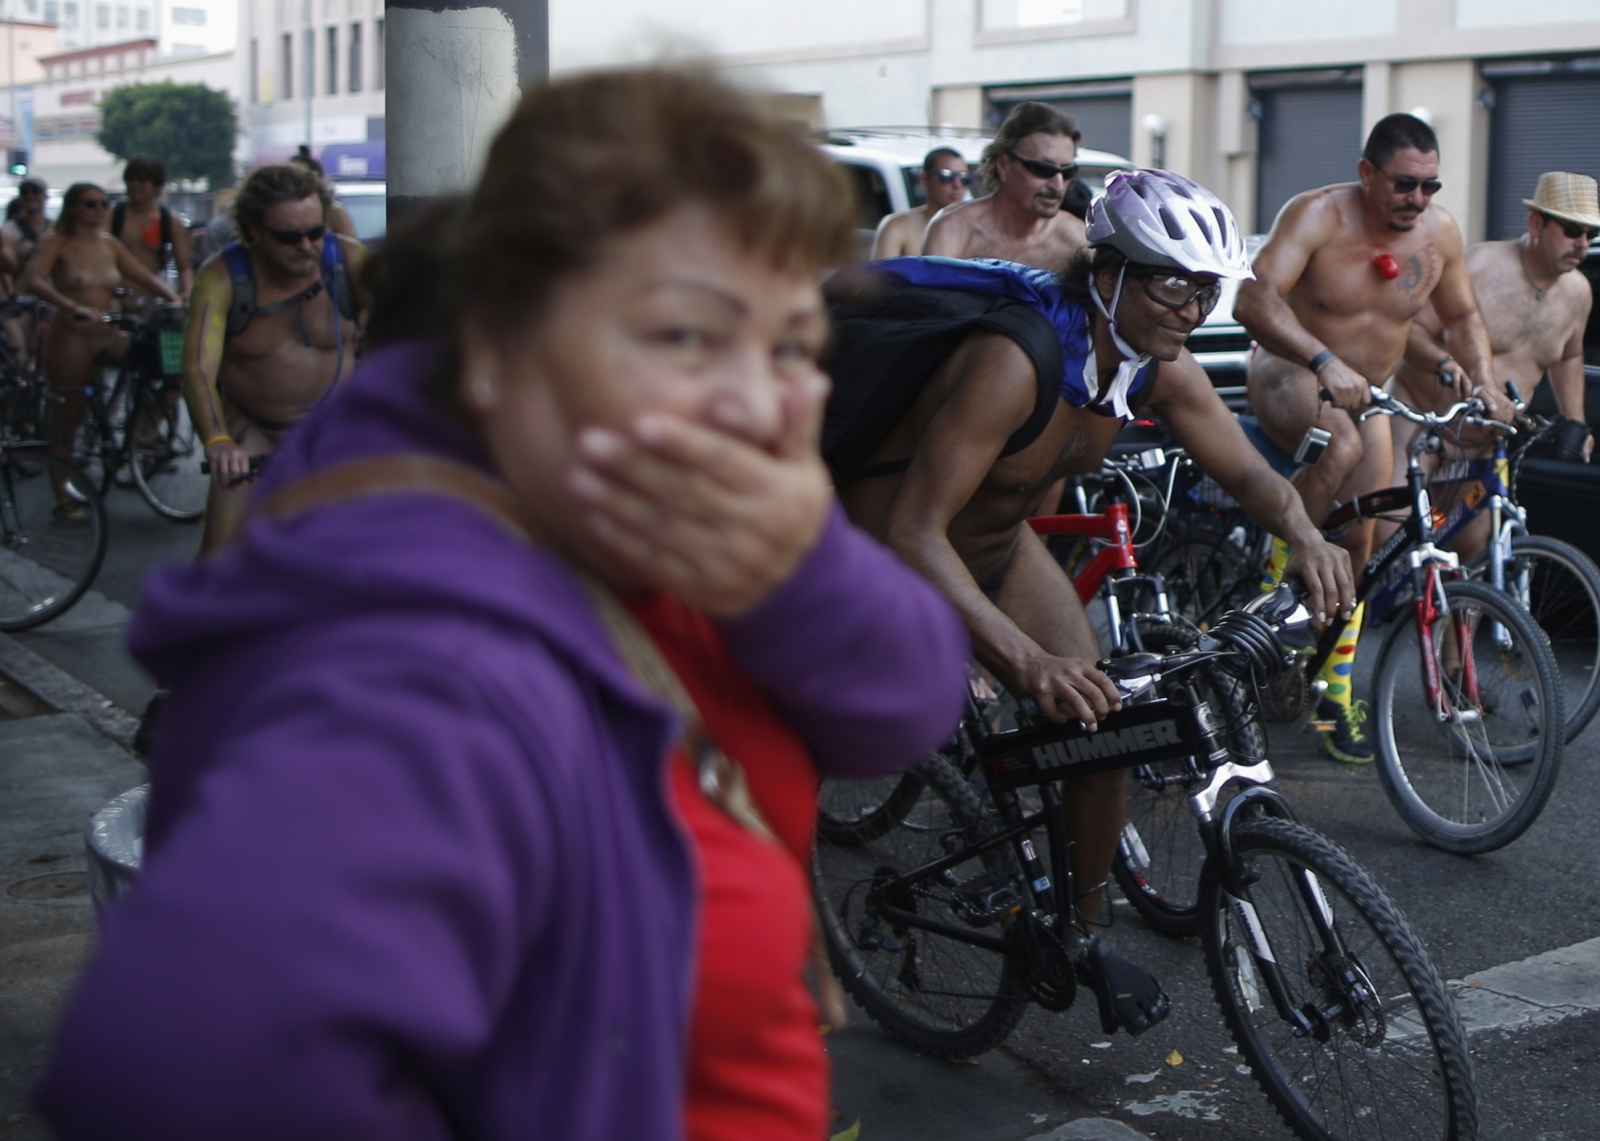 World Naked Bike Ride Cyclist warned by police after complaints he was overexcited IBTimes UK